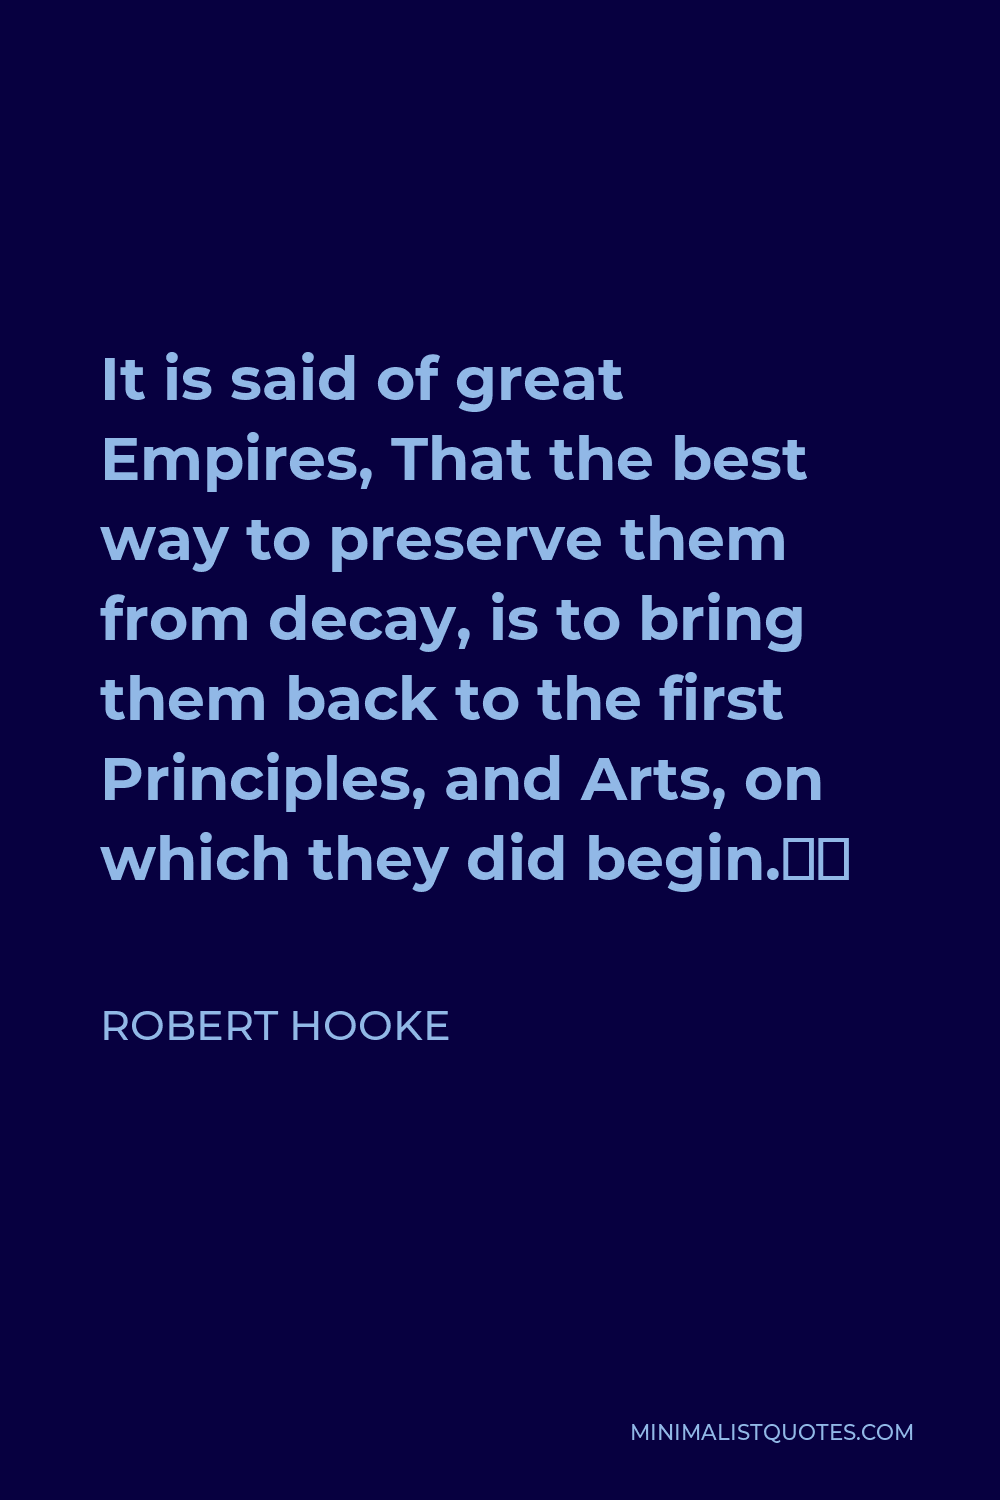 Robert Hooke Quote - It is said of great Empires, That the best way to preserve them from decay, is to bring them back to the first Principles, and Arts, on which they did begin.”